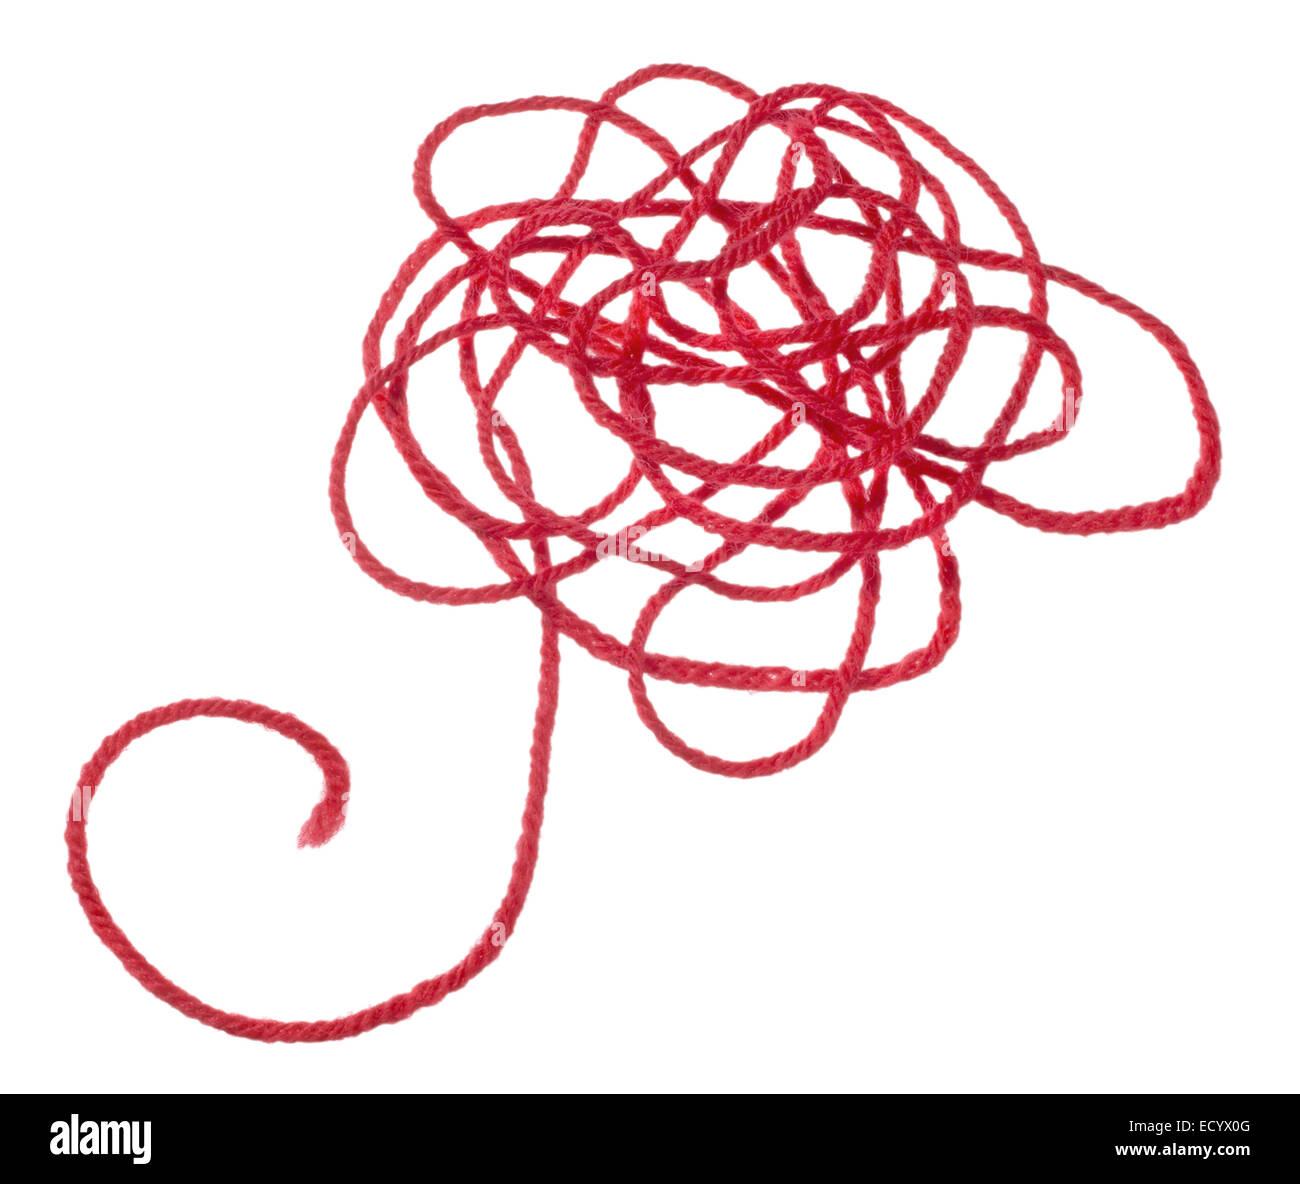 6,178 Tangled Red Strings Images, Stock Photos, 3D objects, & Vectors